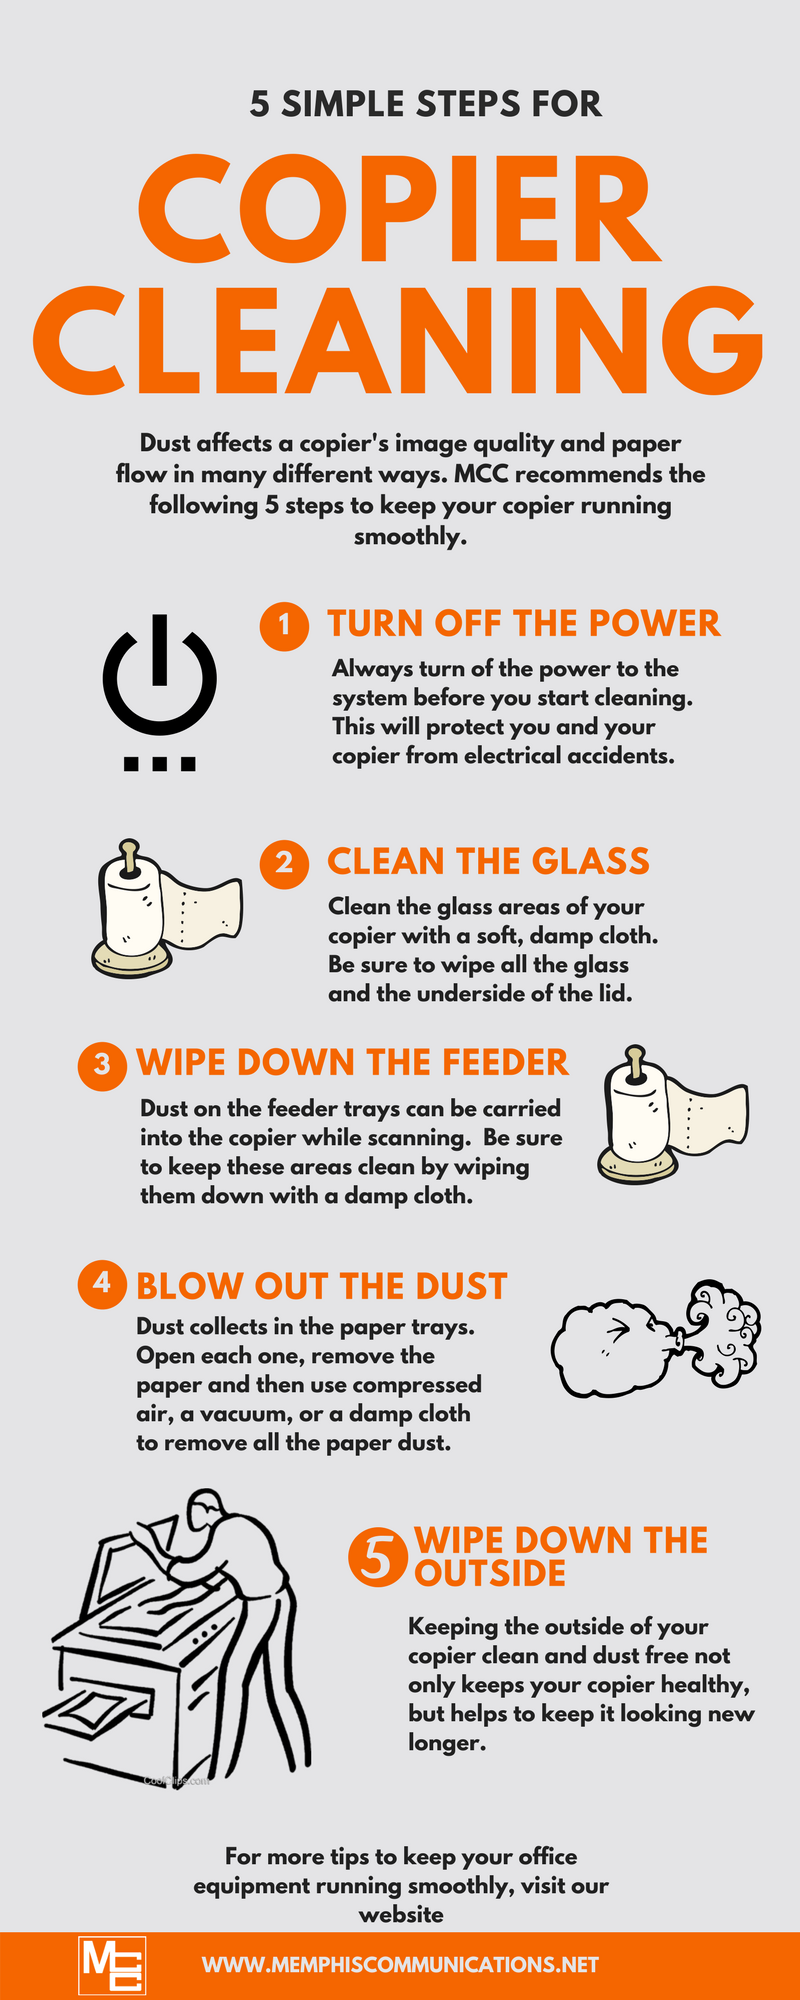 5 Simple Steps for Copier Cleaning - MCC Infographic